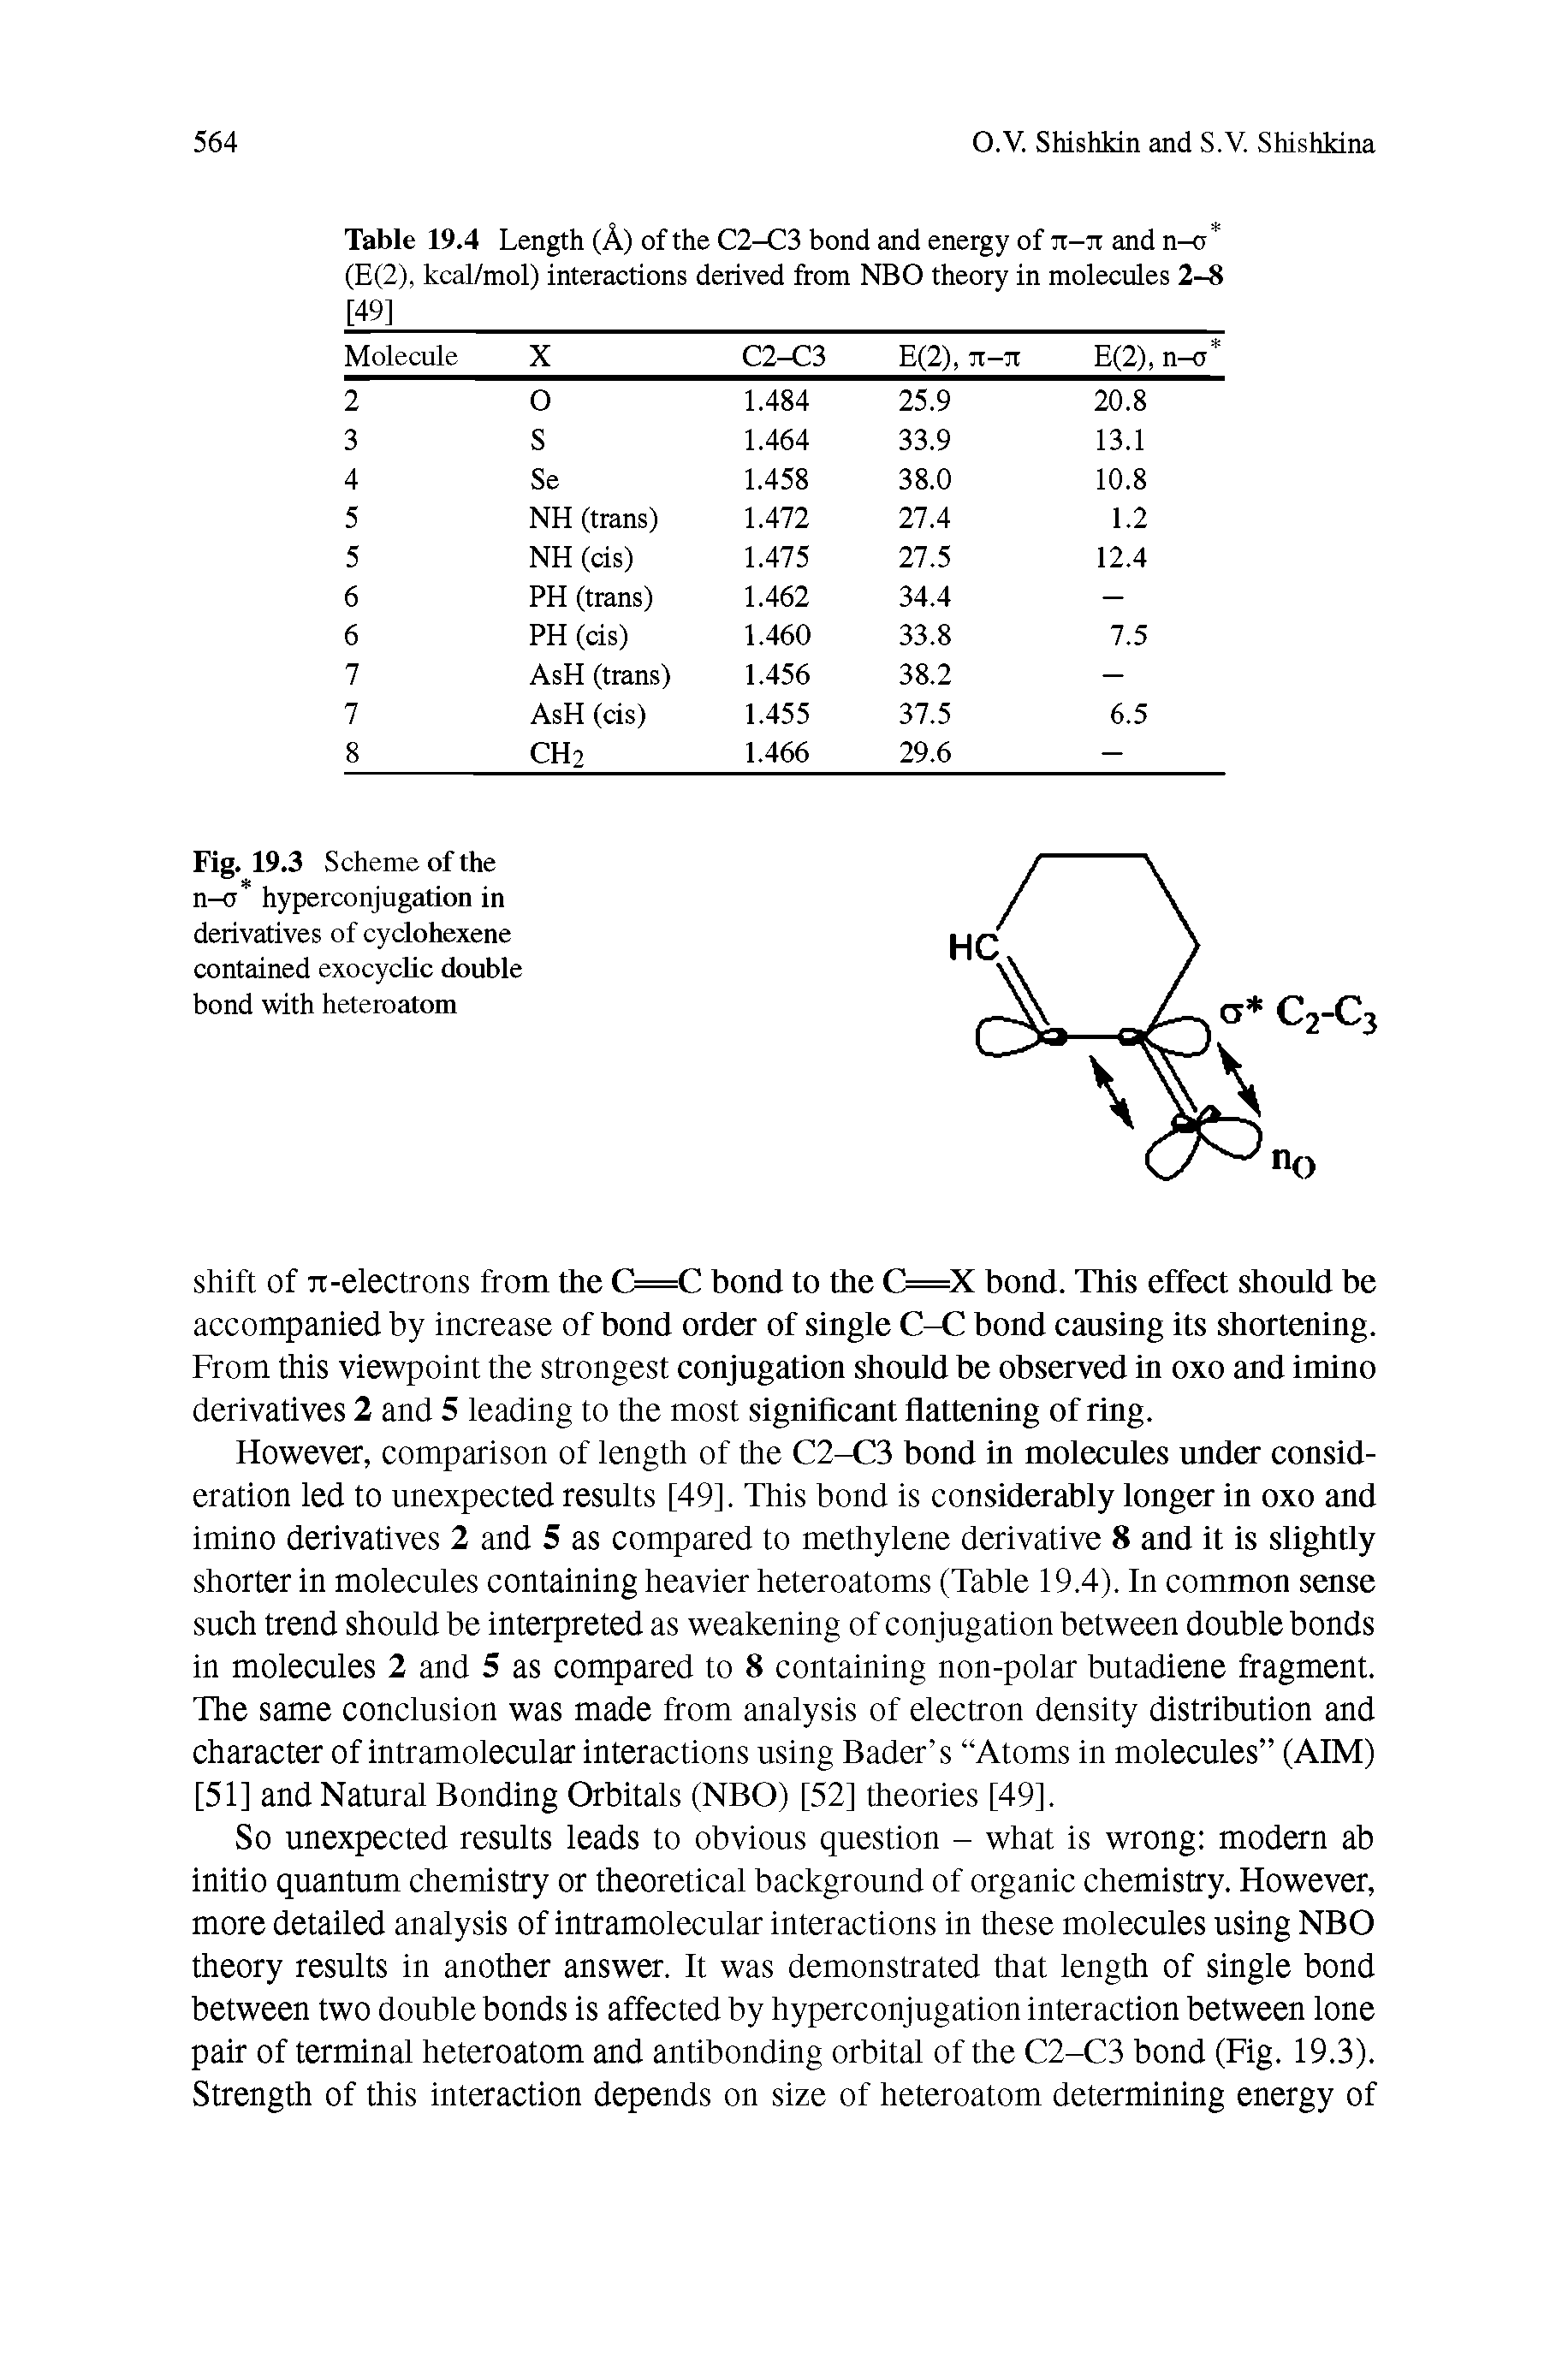 Table 19.4 Length (A) of the C2-C3 bond and energy of jt-jt and n-a (E(2), kcal/mol) interactions derived from NBO theory in molecules 2-8 [49]...